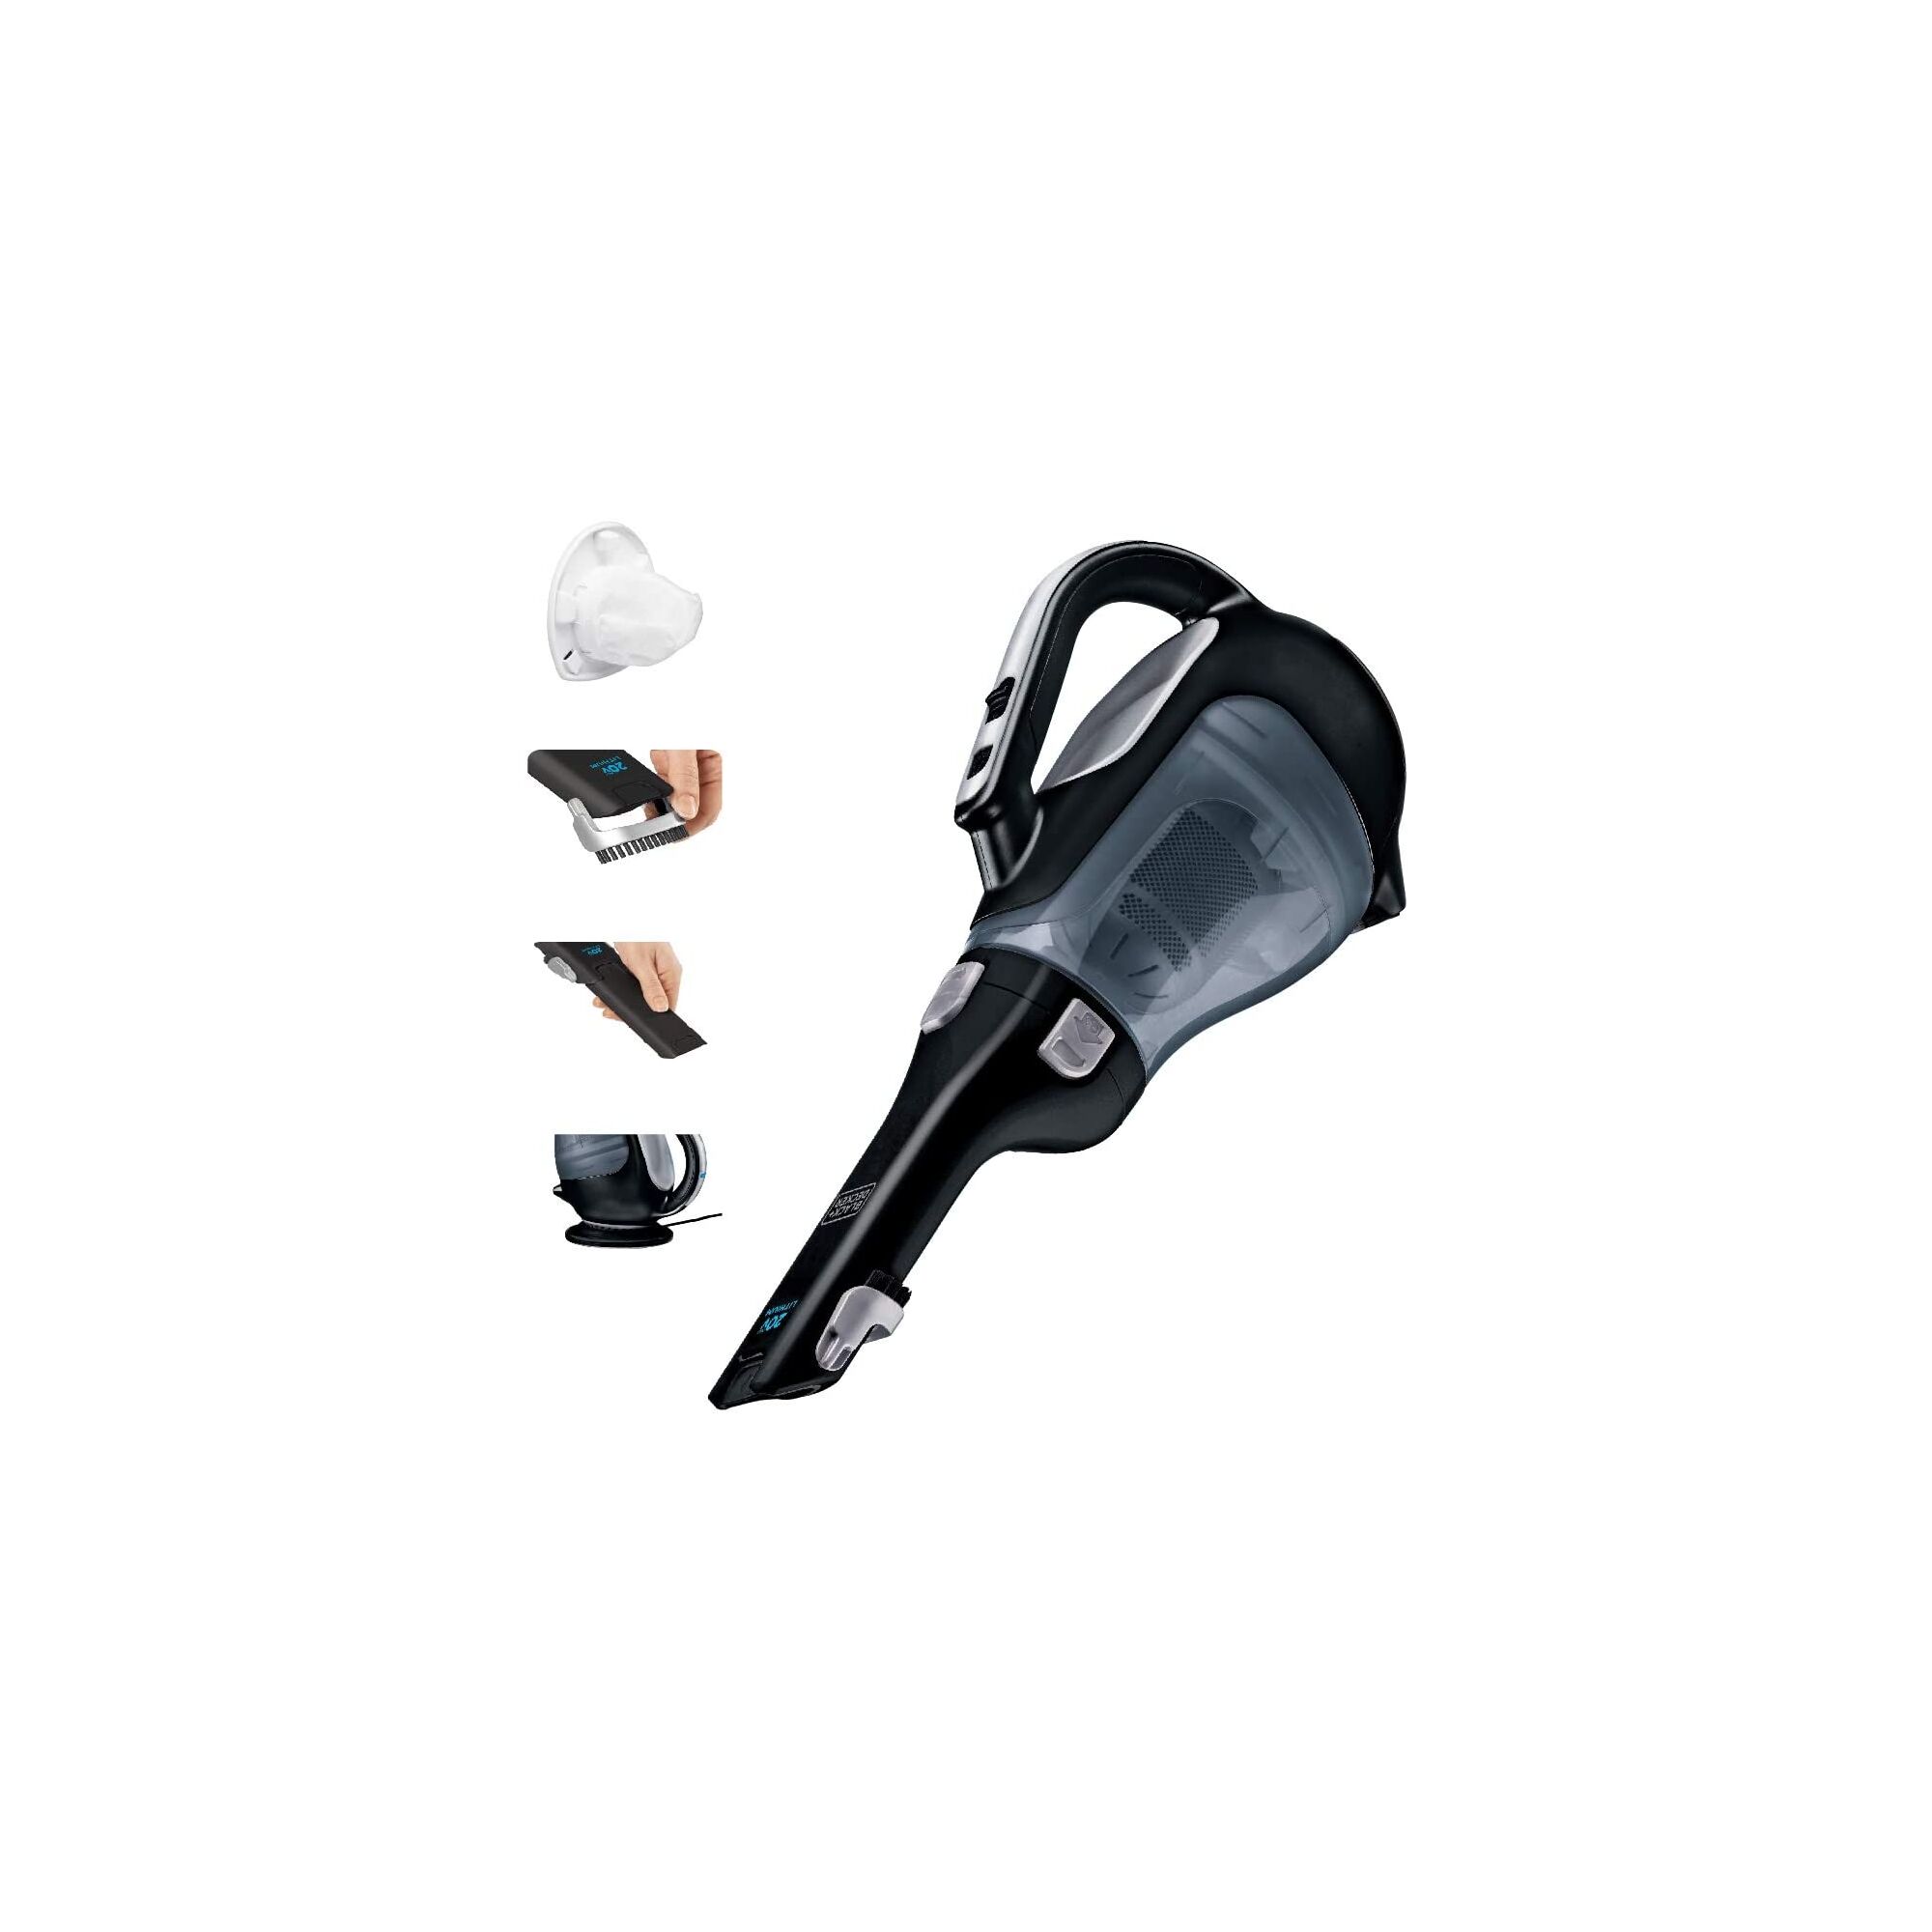 Dustbuster Cordless Hand Vacuum kit showing key accessories and filter